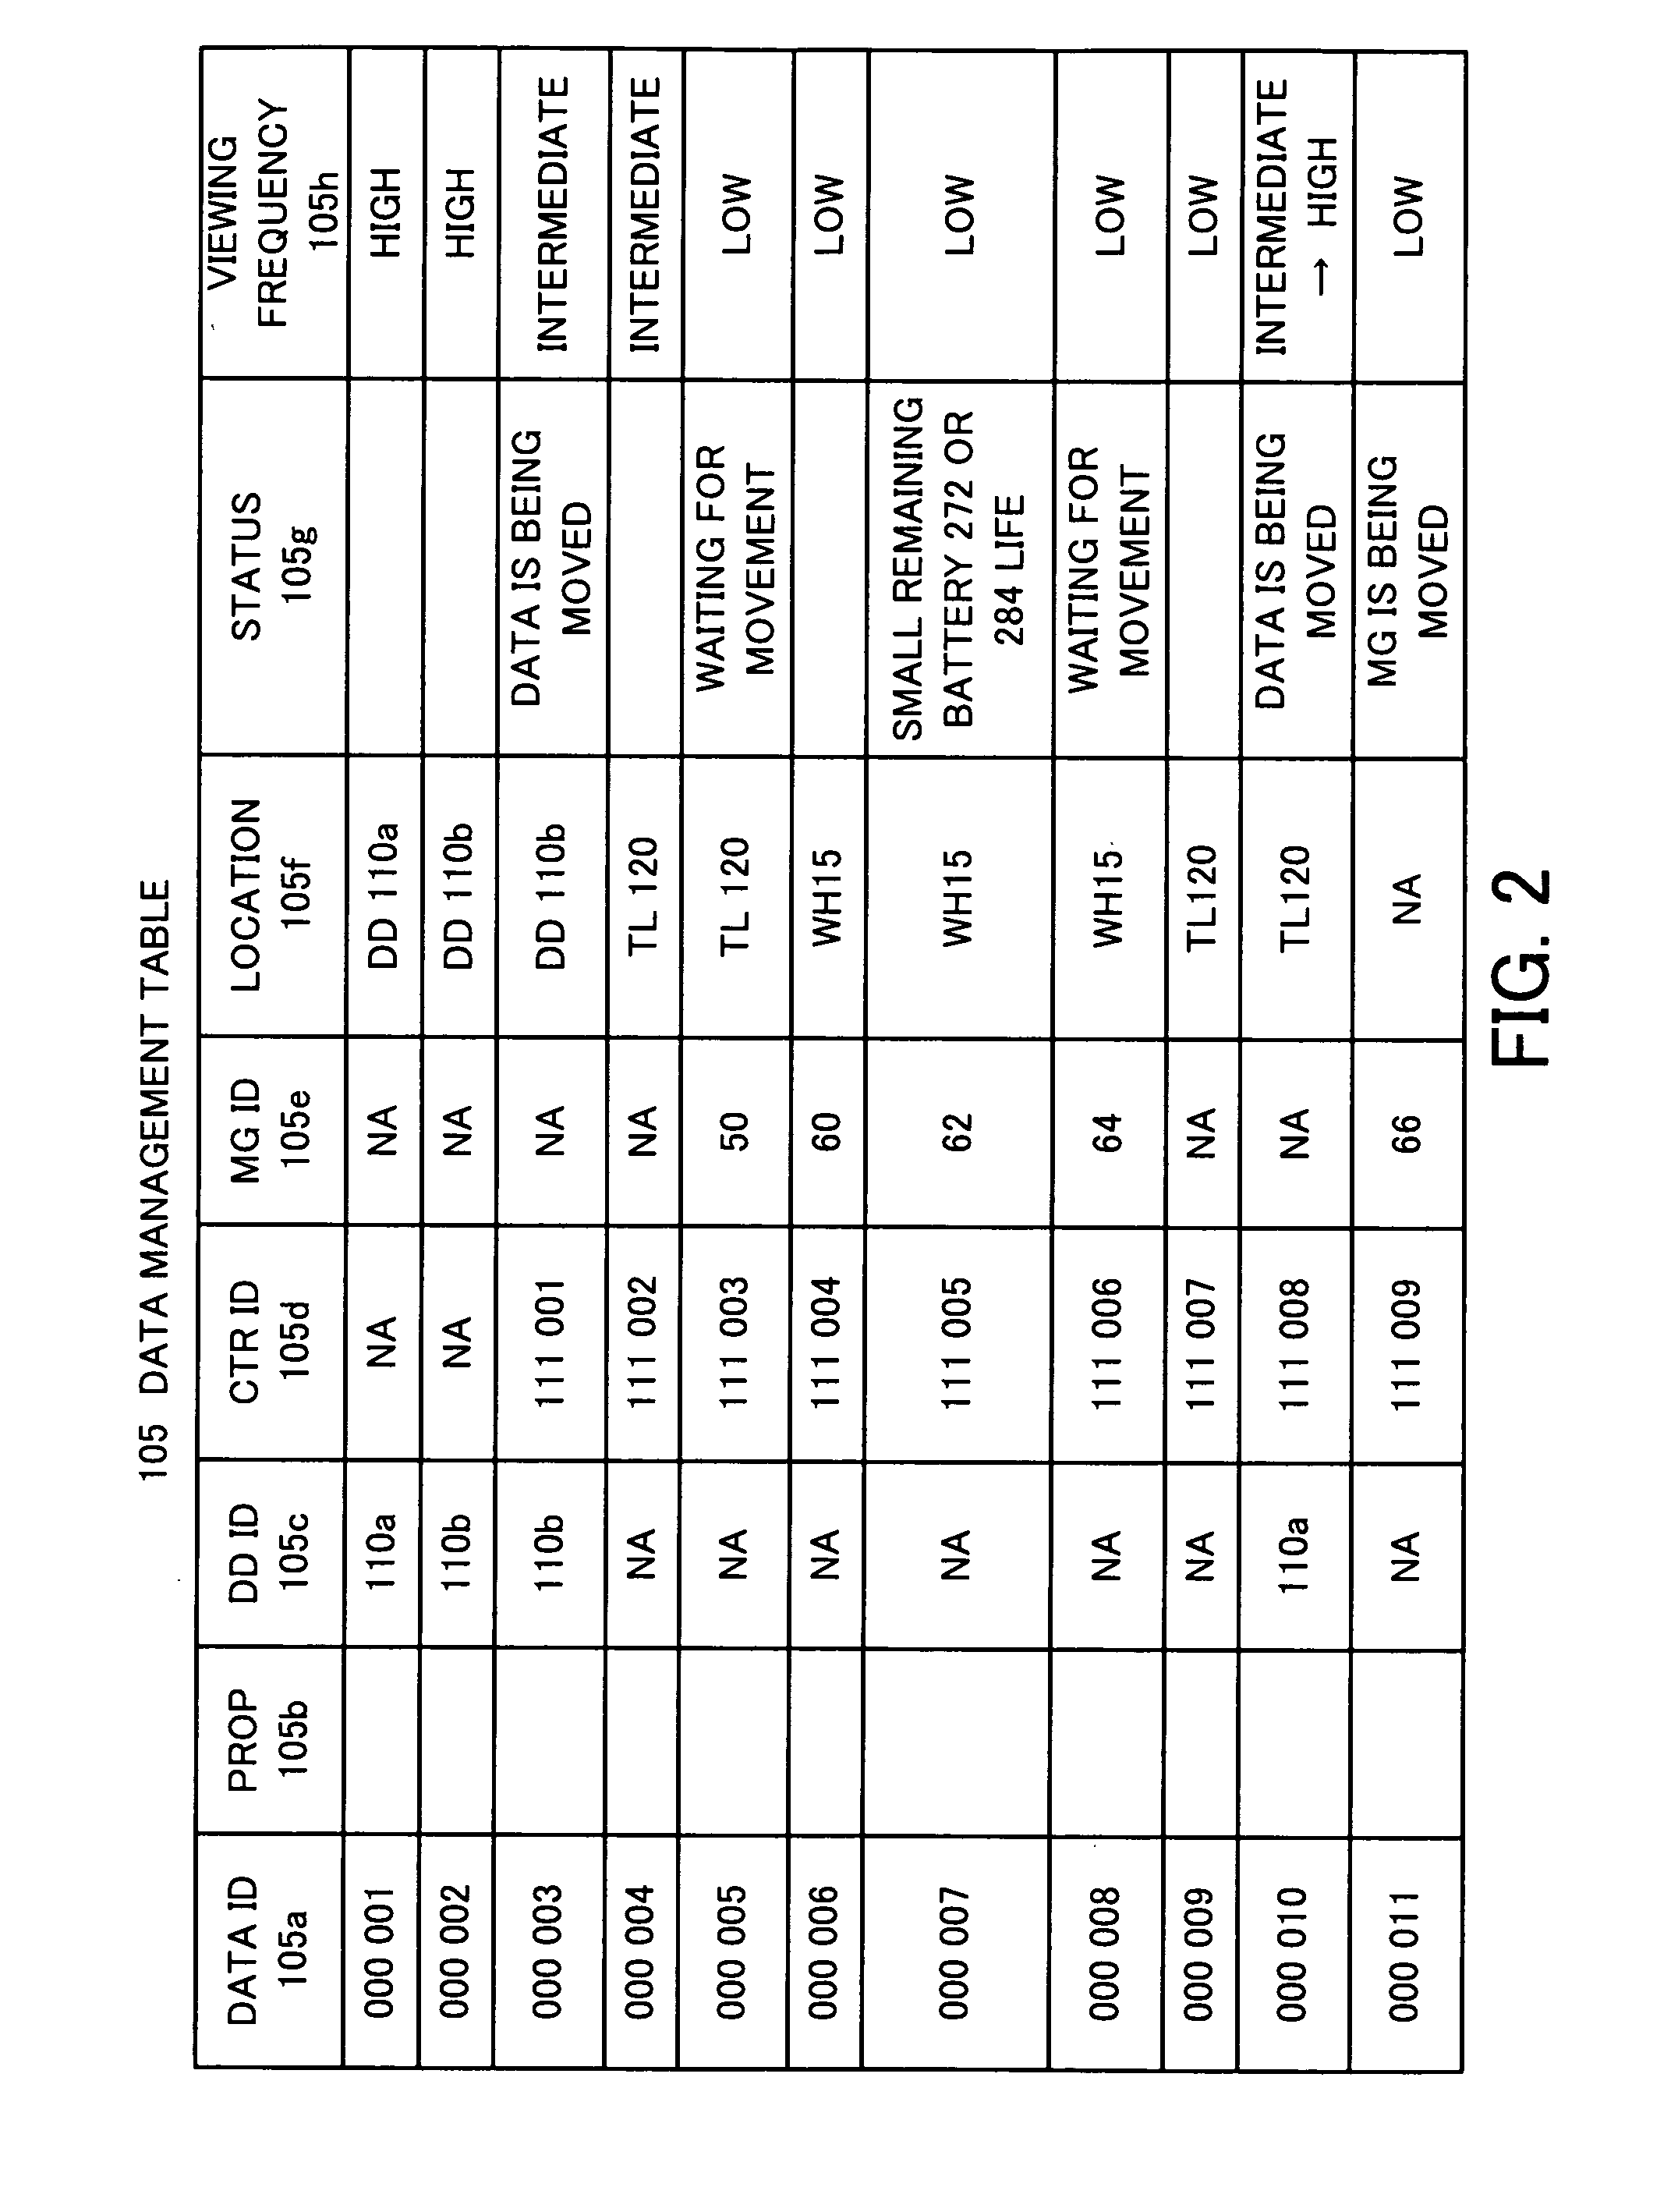 Hierarchical storage system, library apparatus, magazine, and control method of the hierarchical storage system